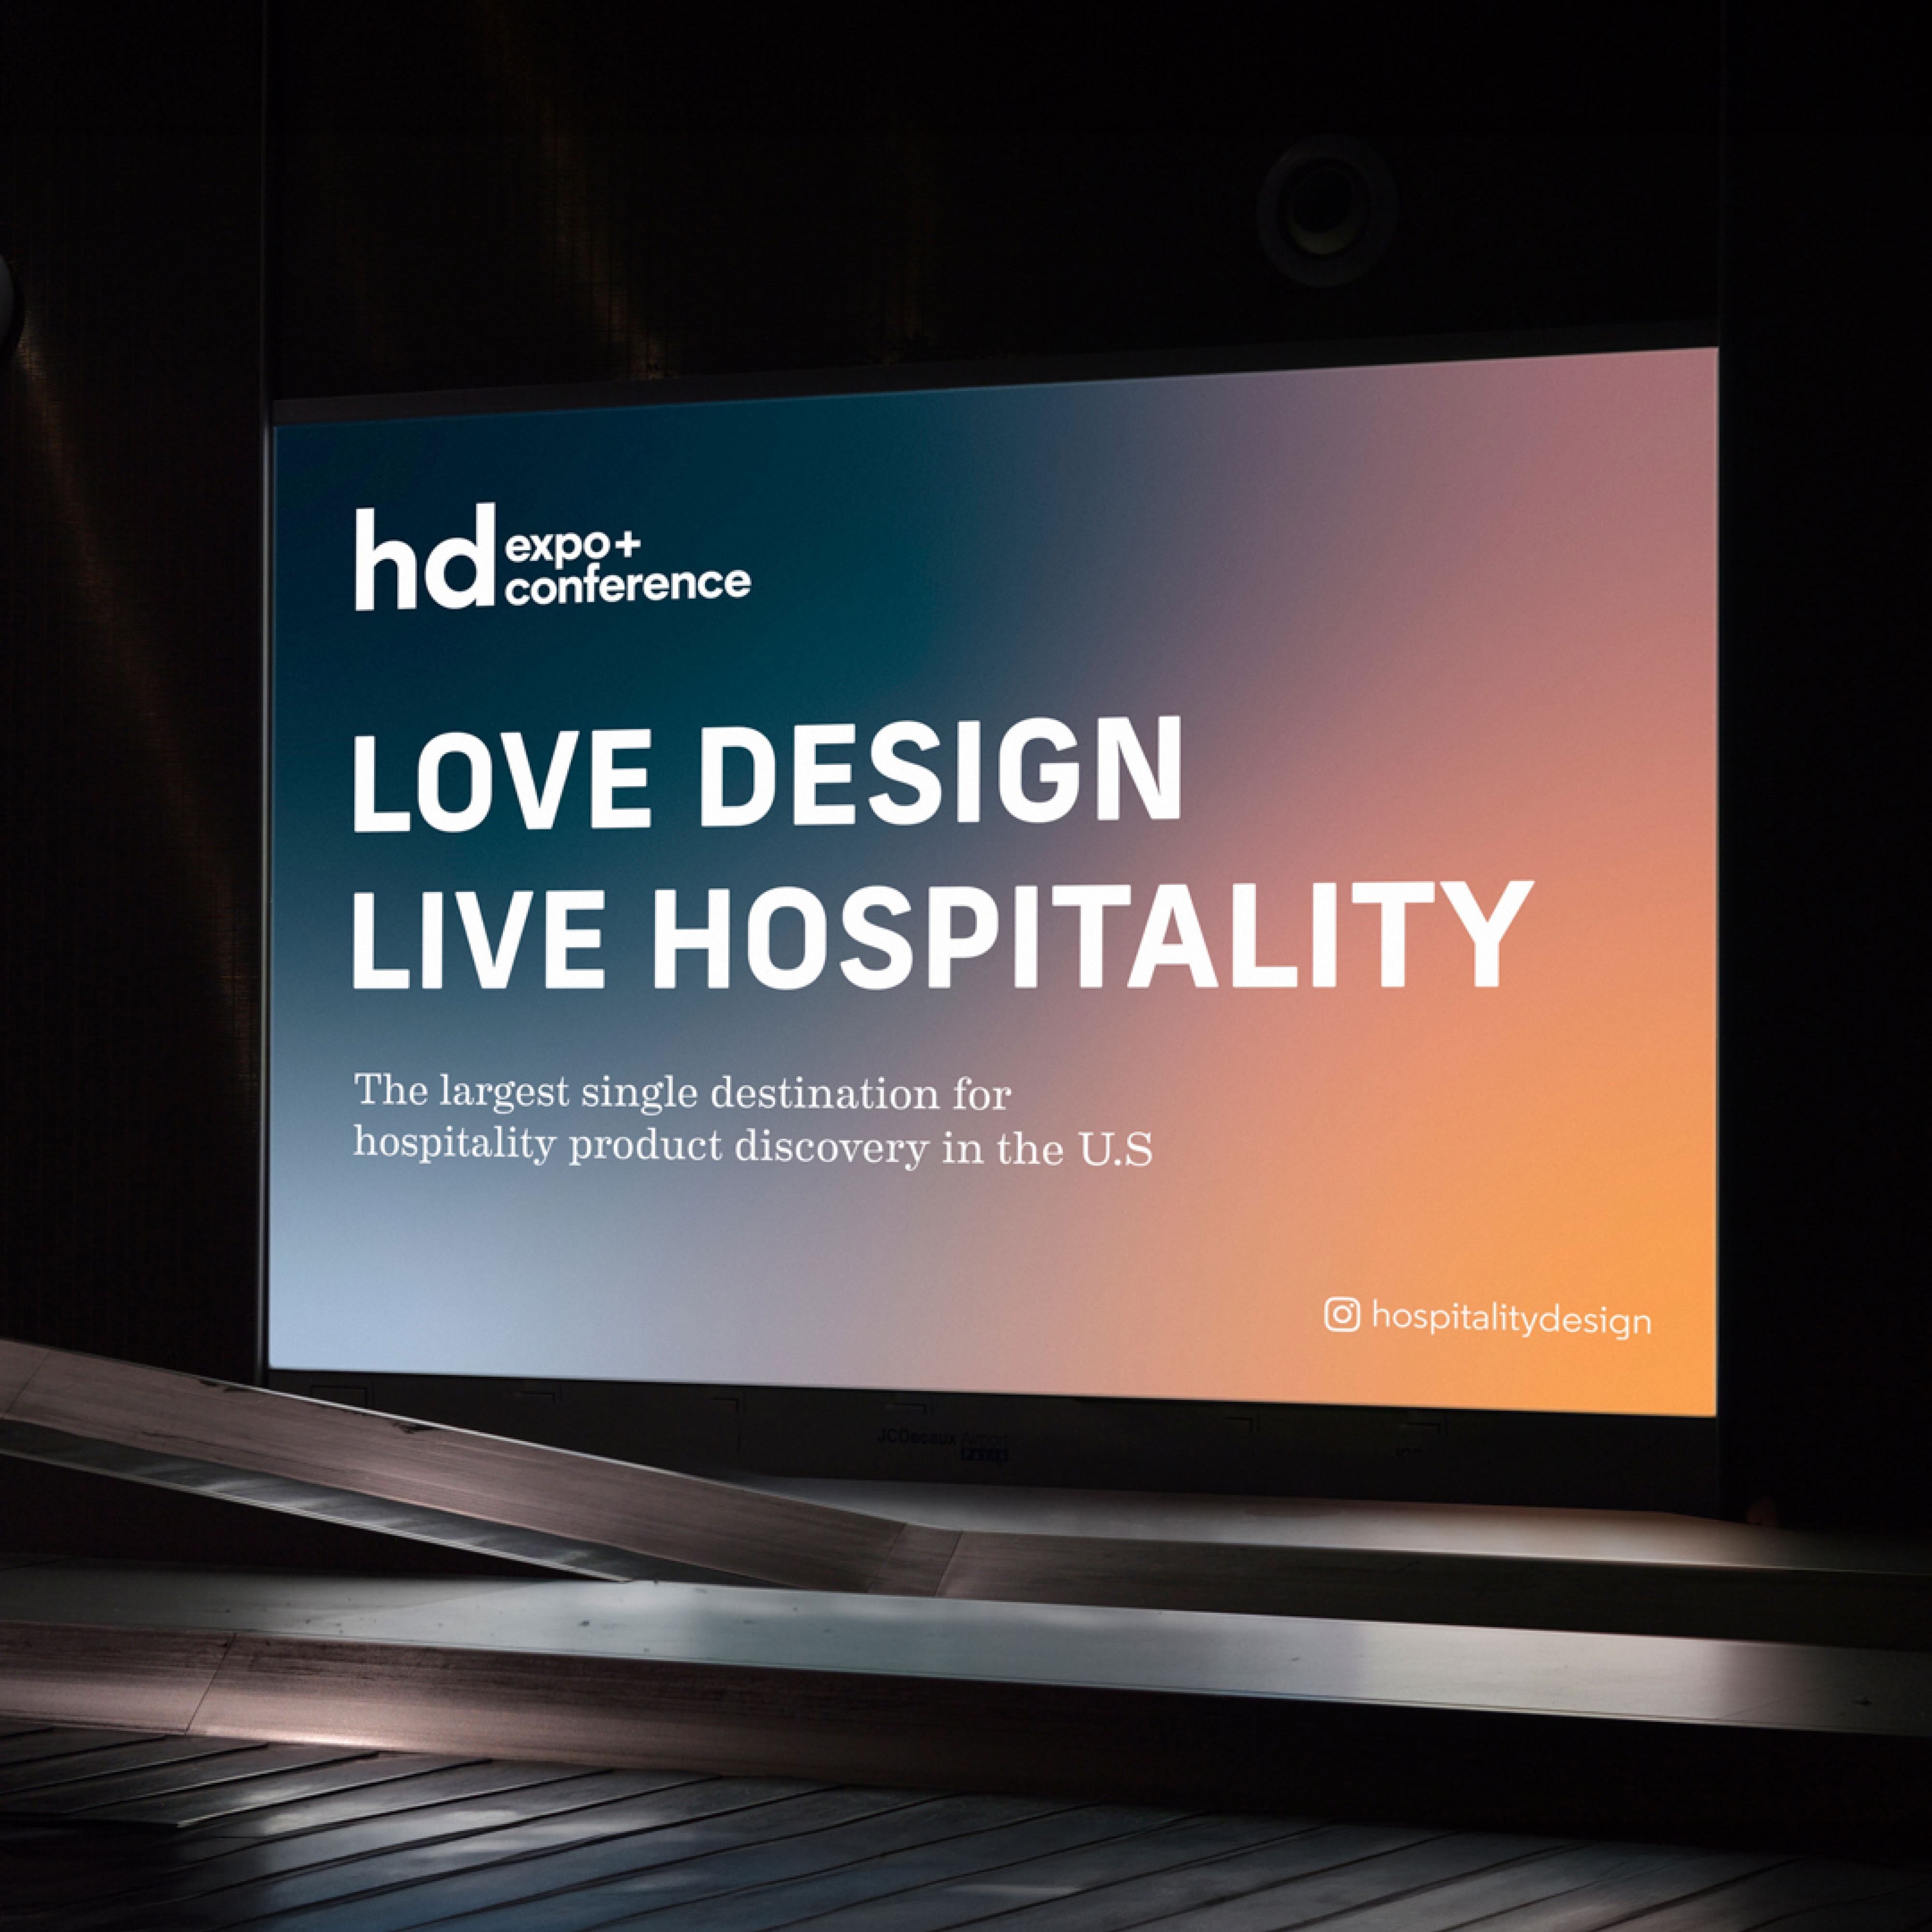 Crown Creative’s Revamp of HD Expo + Conference: A New Vision for Hospitality Design